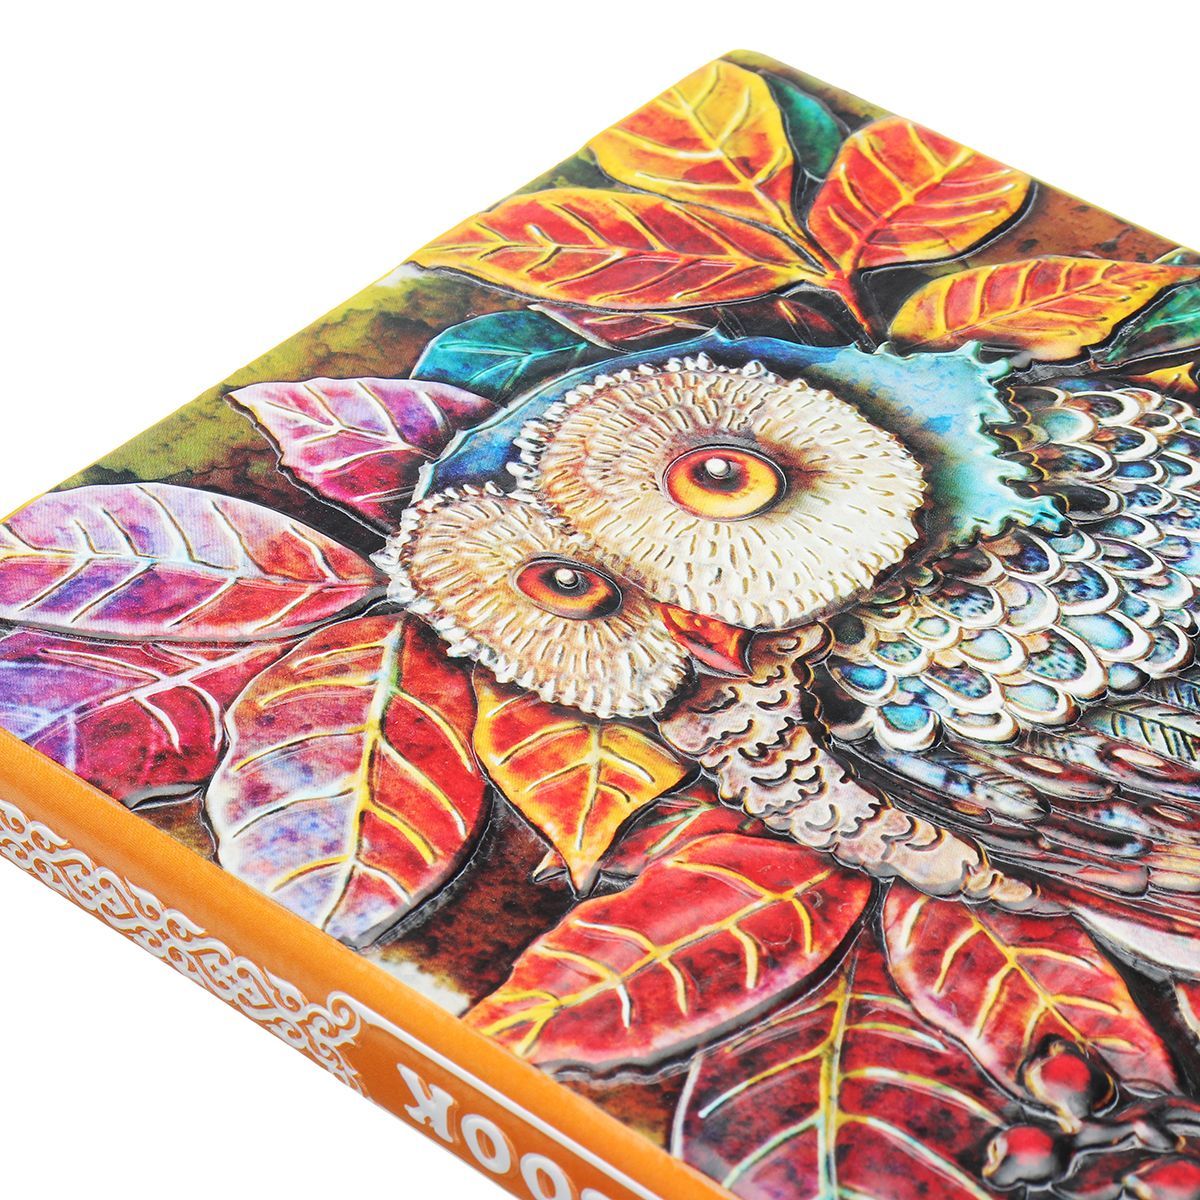 Handmade-Vintage-3D-Embossed-Owl-Travel-Diary-Notebook-Journal-Leather-Notepad-1528173